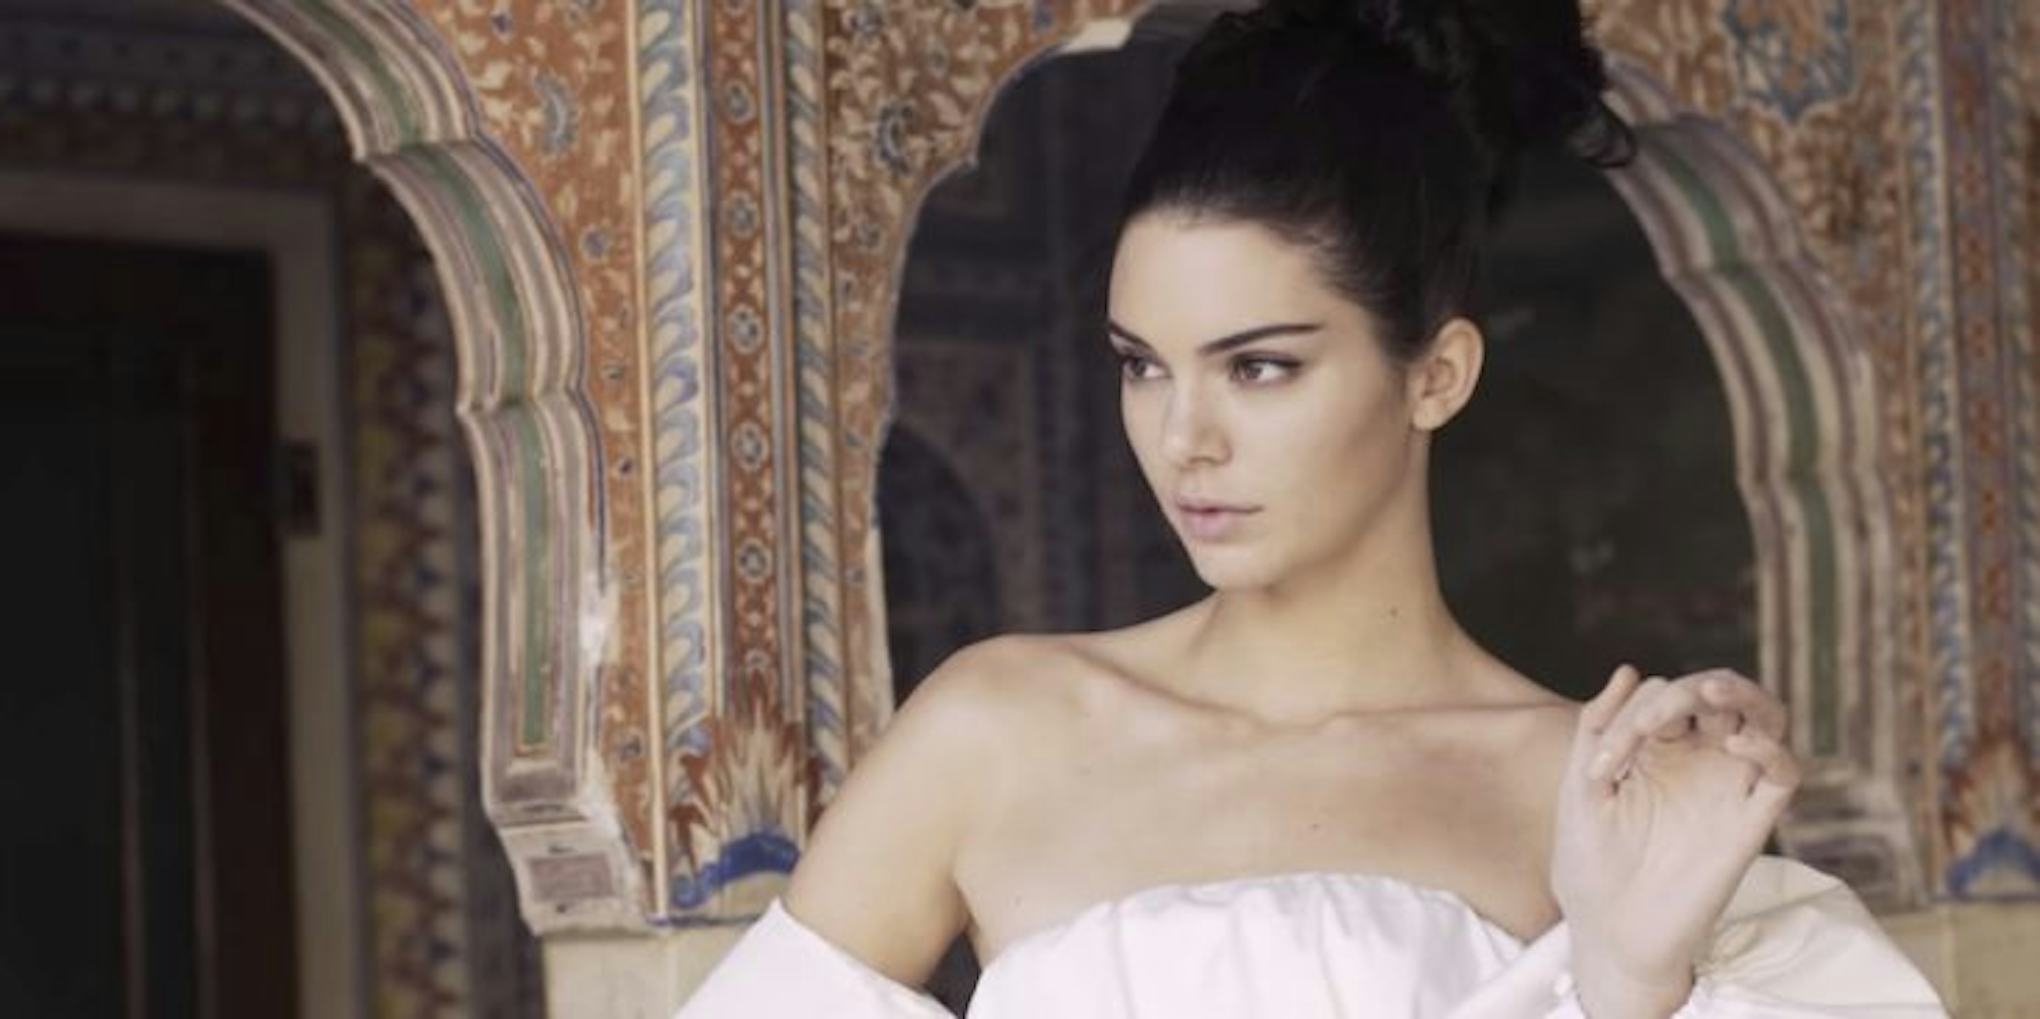 Kendall Jenner S India Vogue Photo Shoot Is Gorgeous